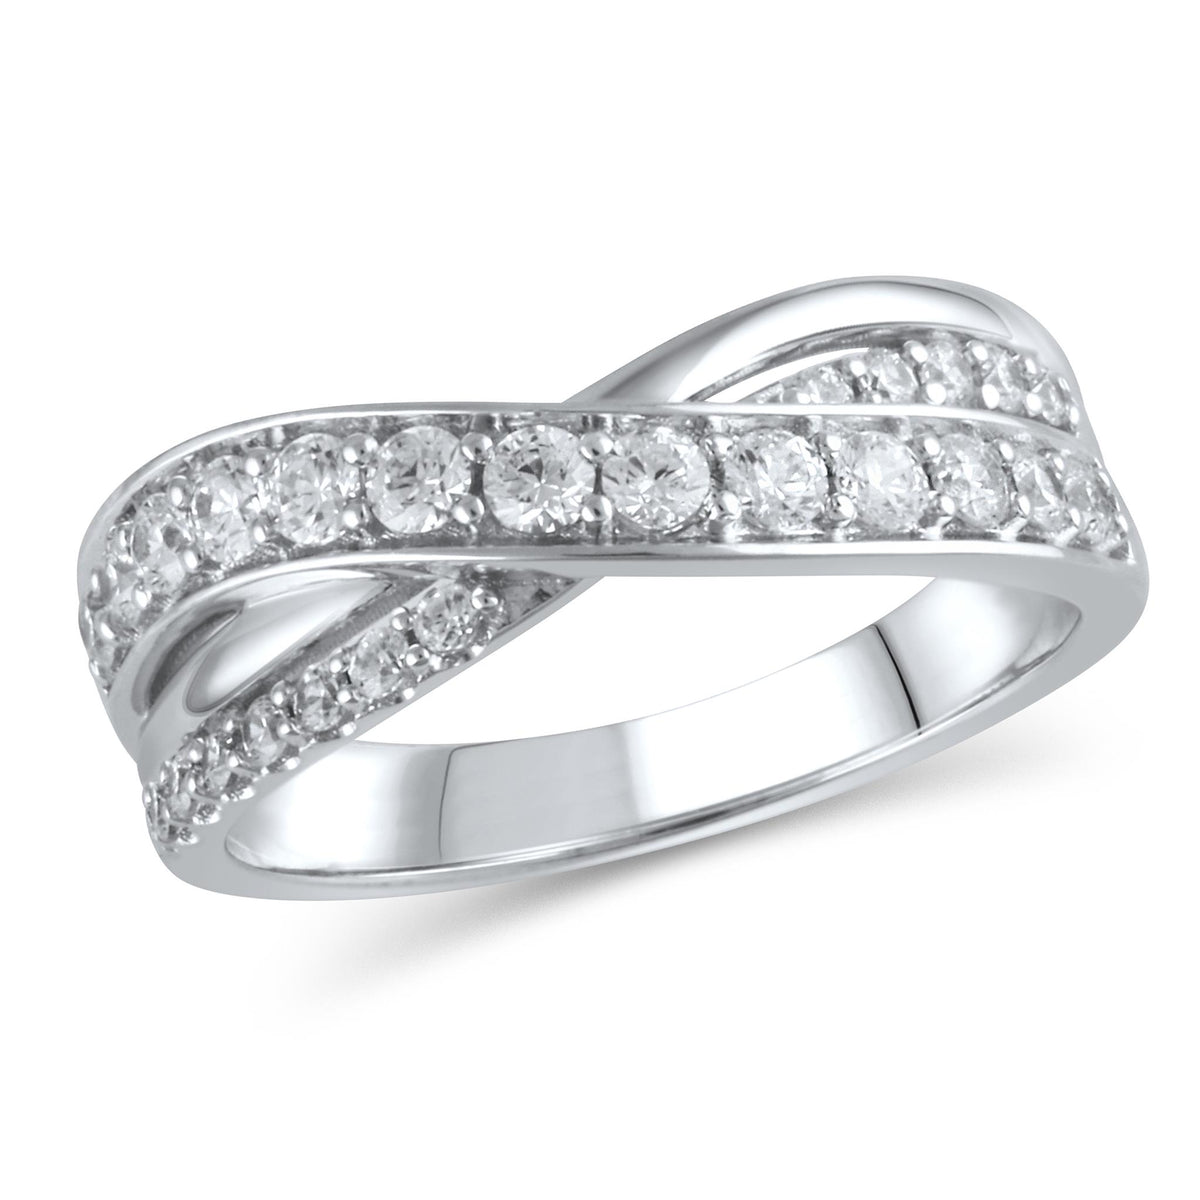 14Kt White Gold Prong Set Wedding Ring With 1.25cttw Natural Diamonds